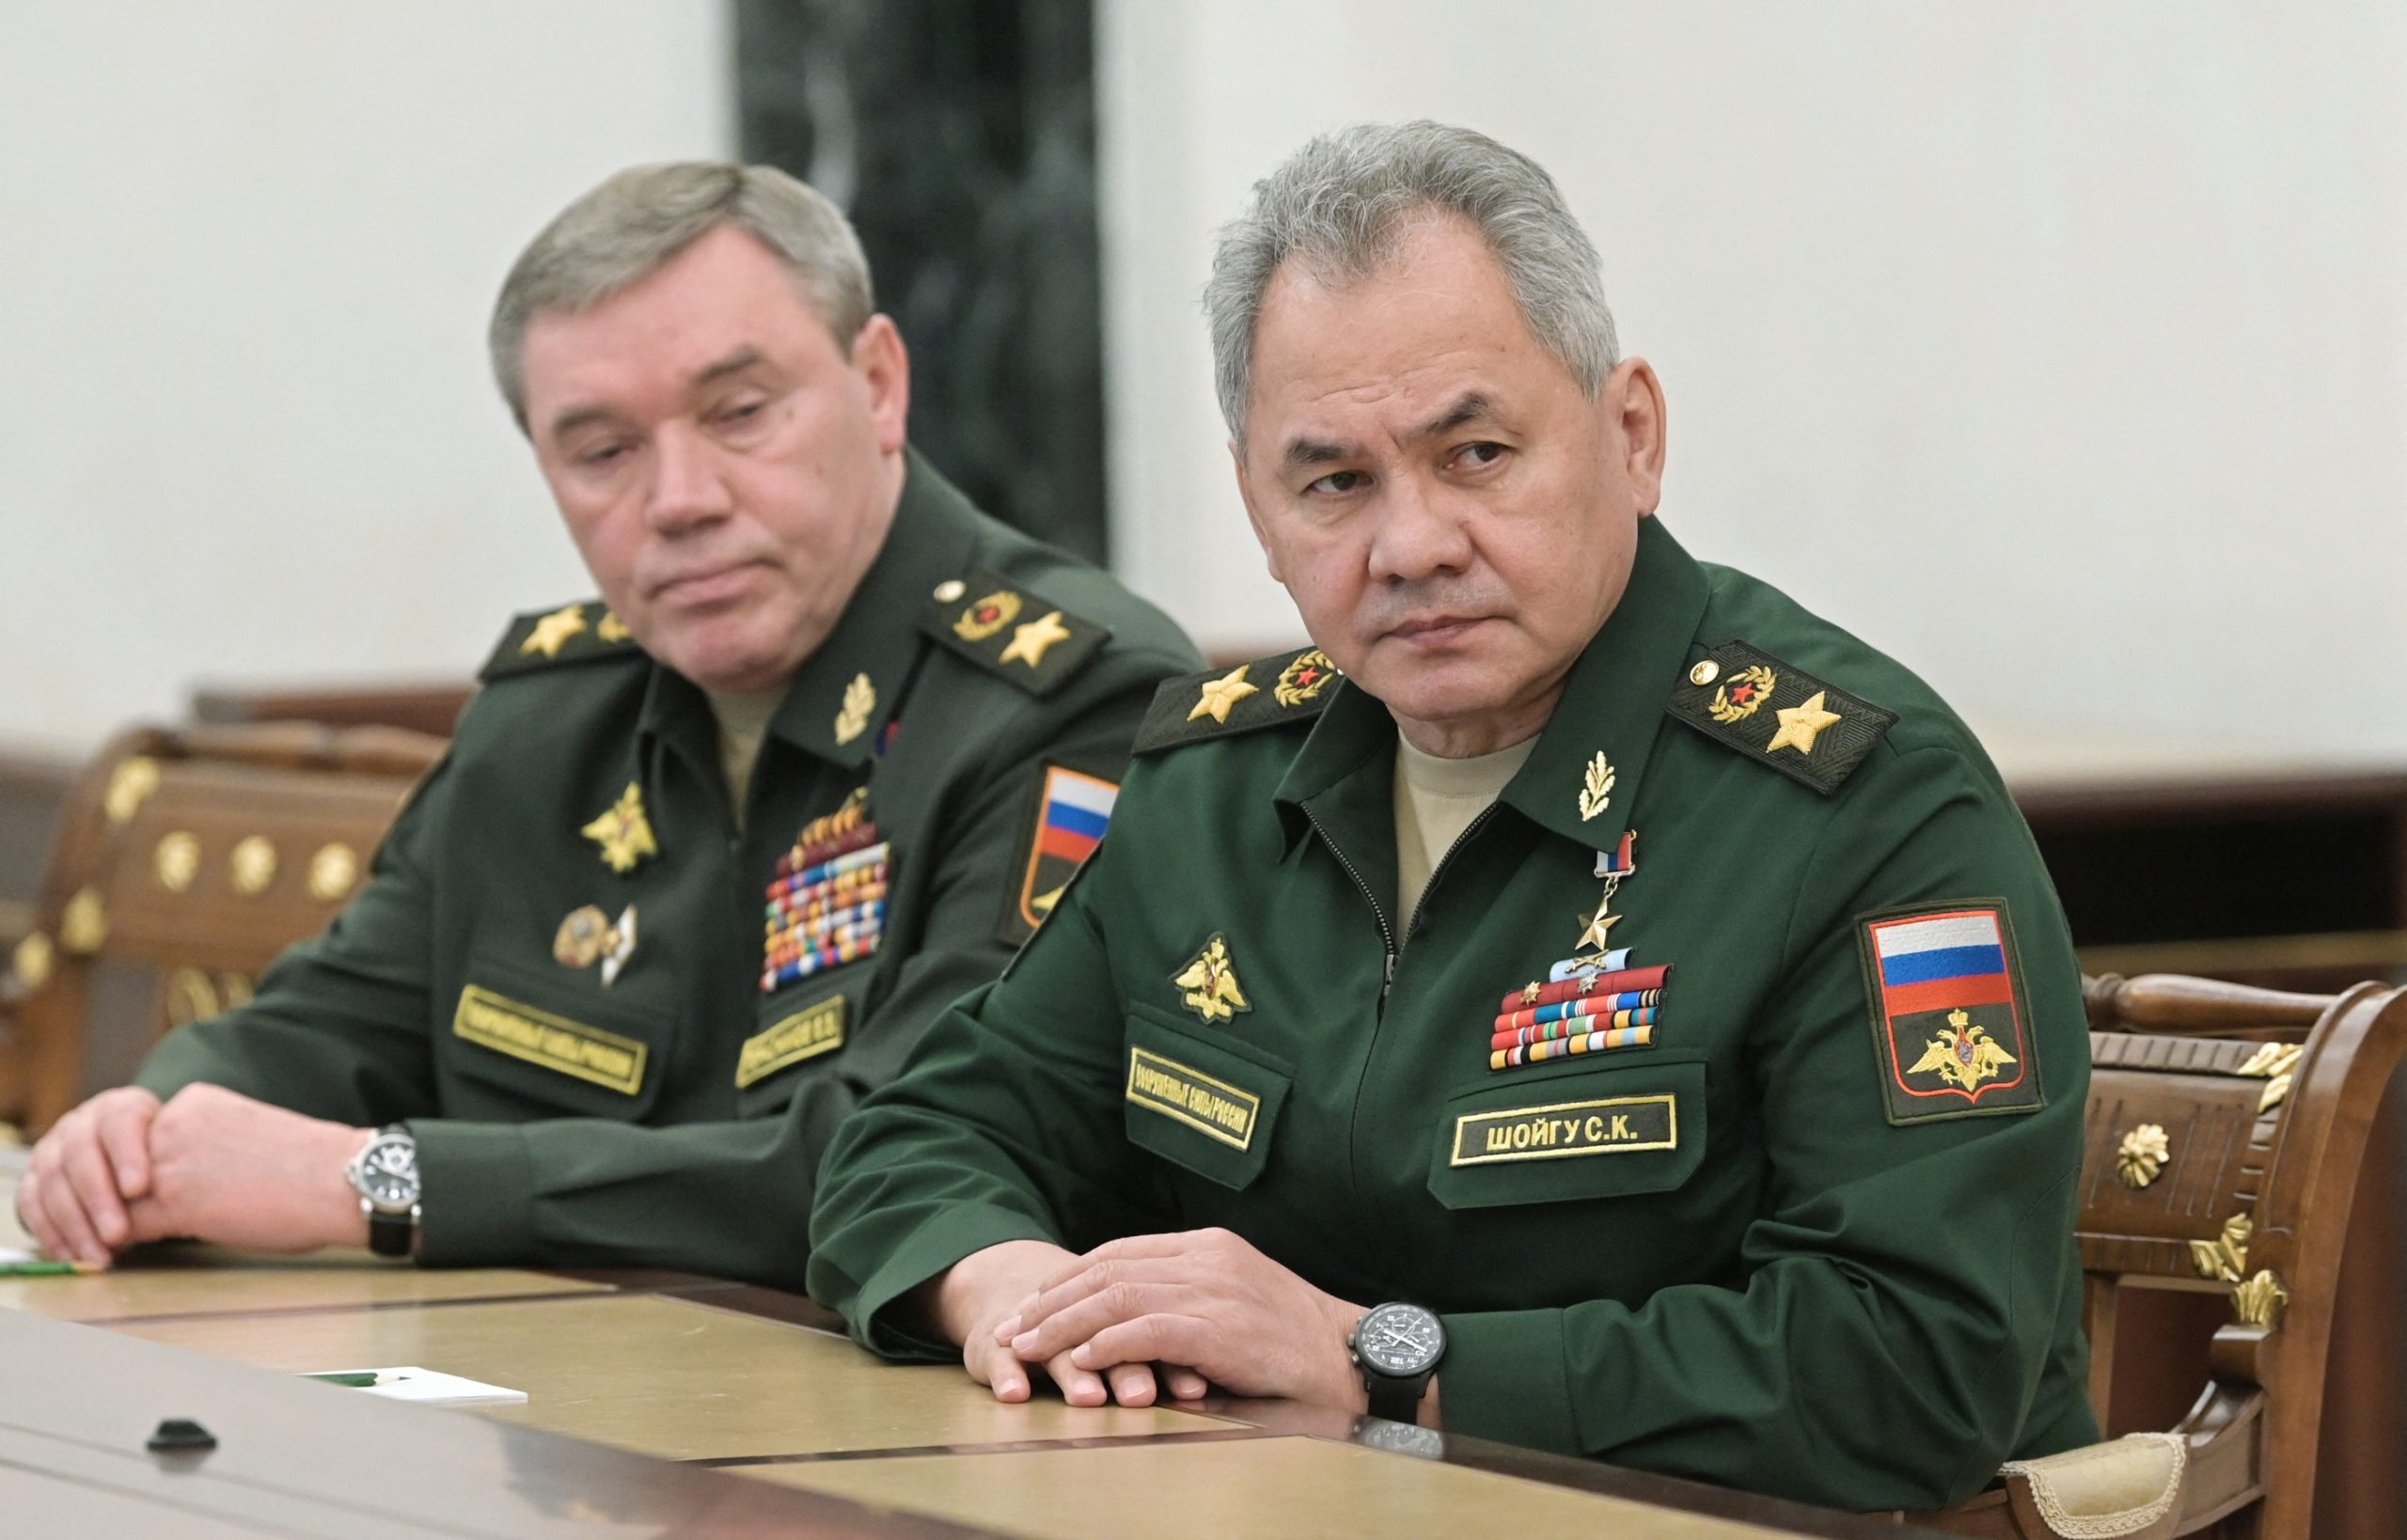 Russia’s Ministry of Defense Head Sergei Shoigu reportedly missing, hasn’t made public appearances in 12 days